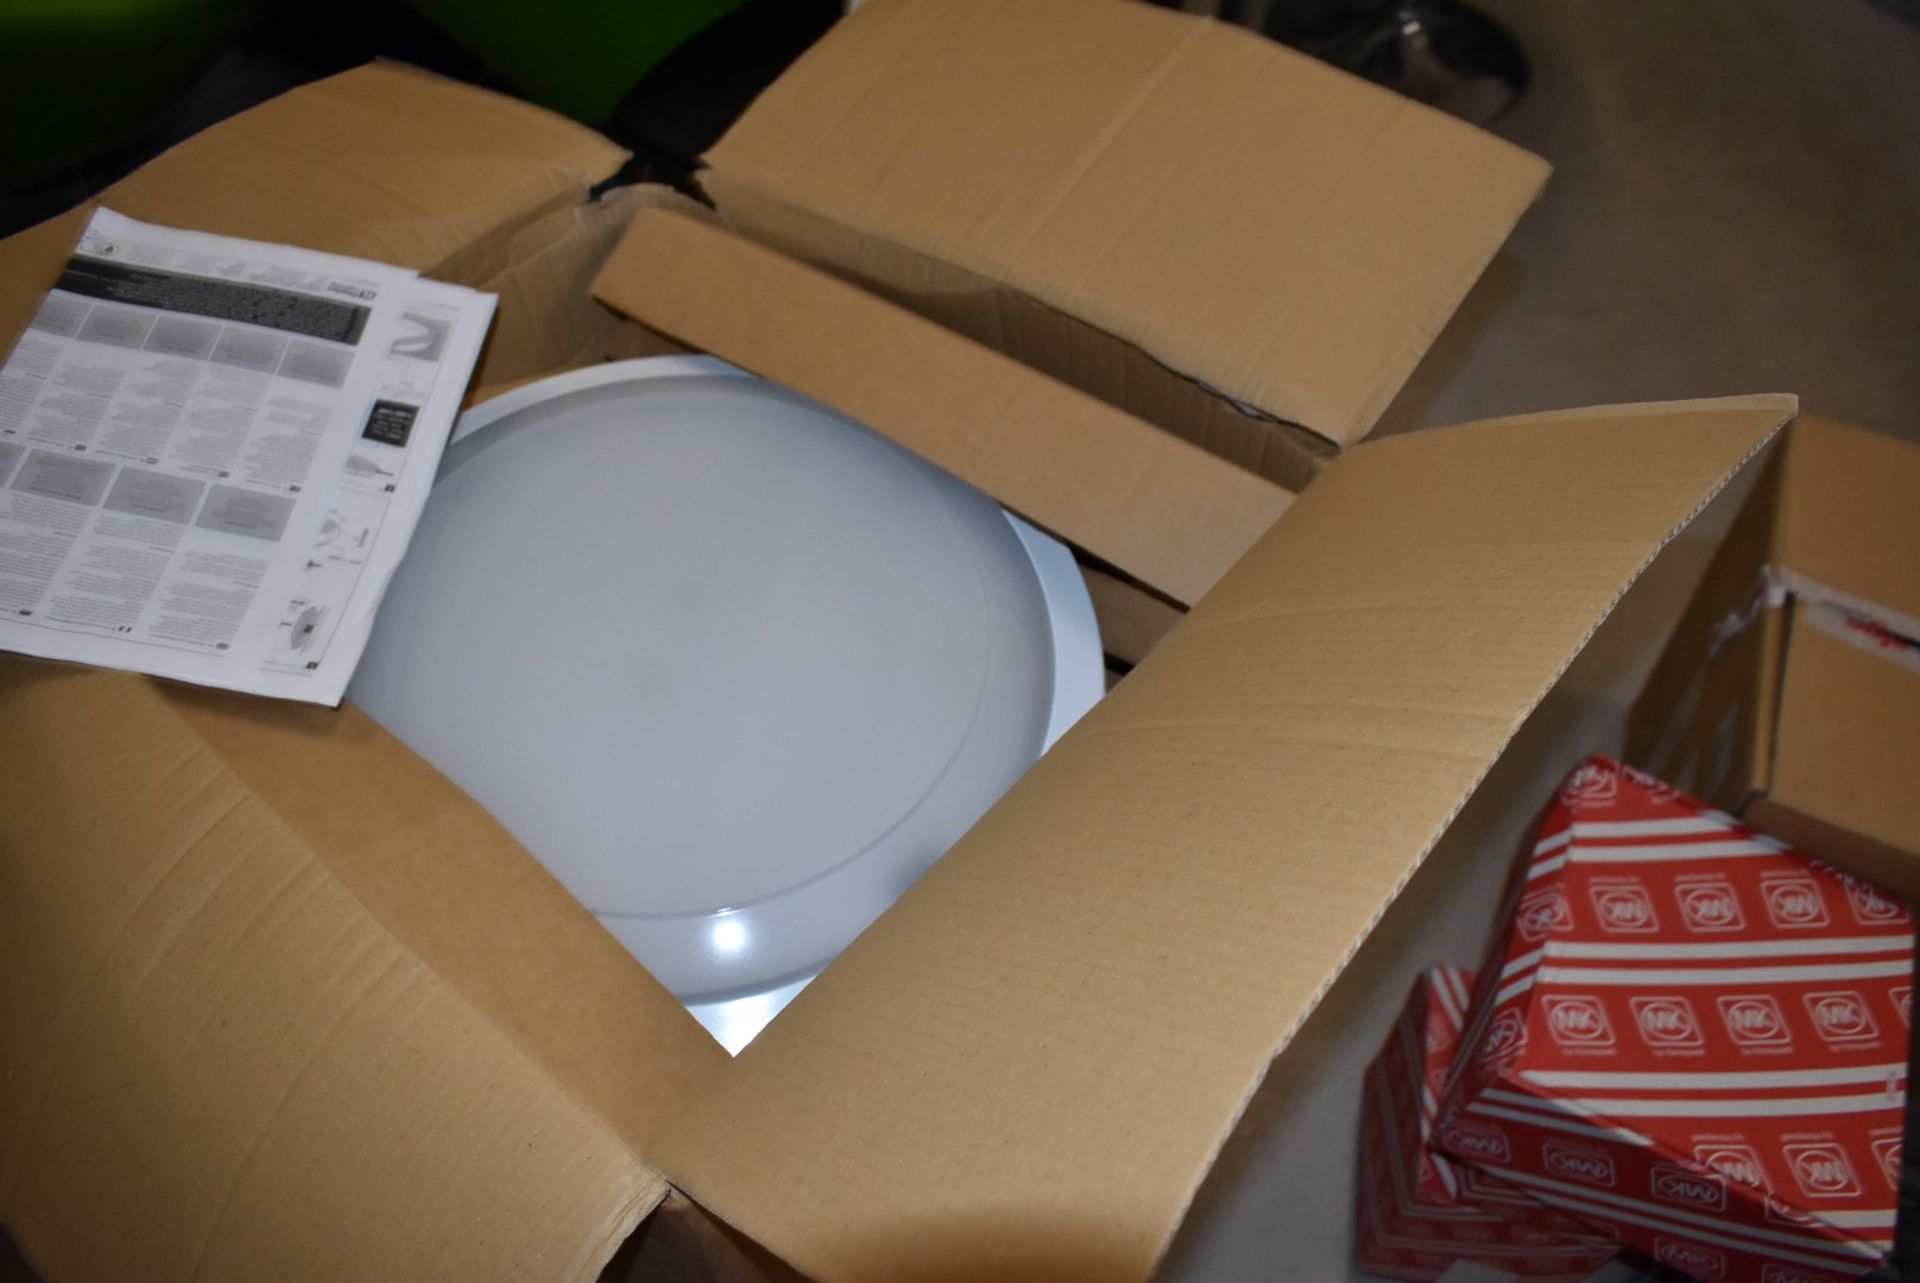 4 x Thorlux LED Ceiling Lights - Includes Two Boxes, Each Box Contains Two Lights - Image 2 of 3